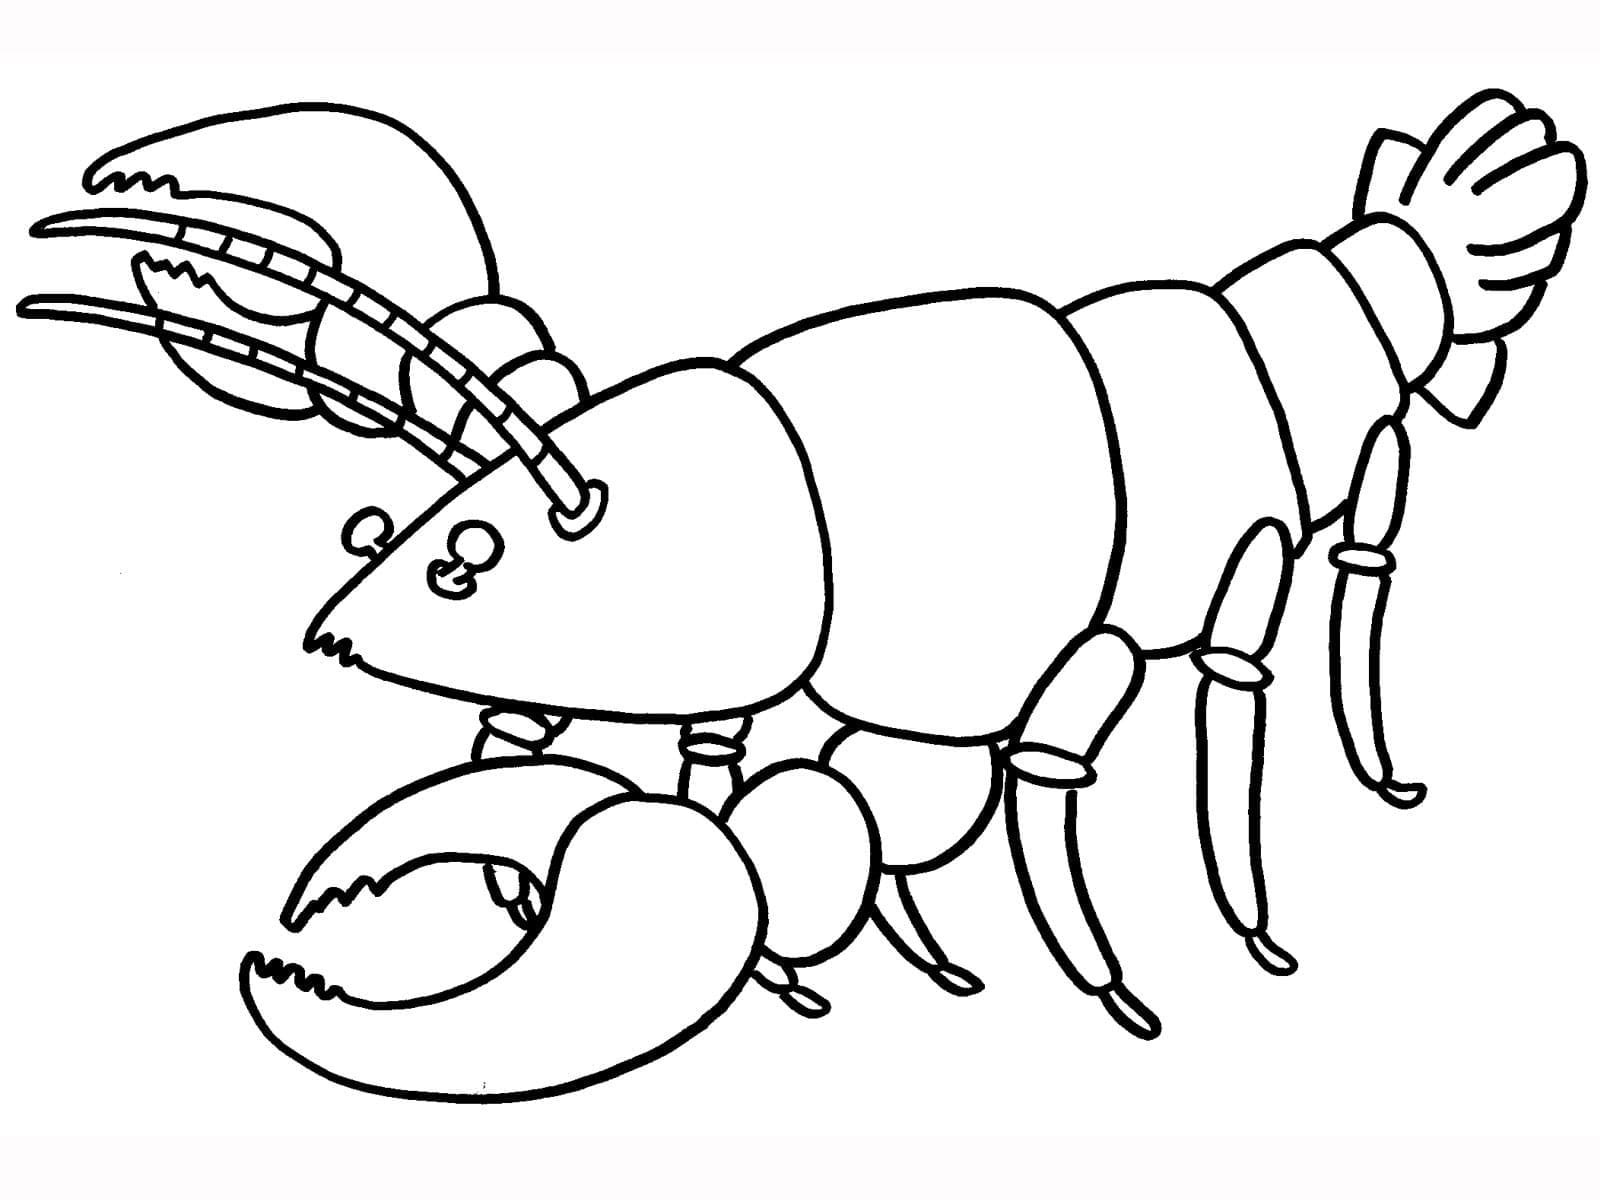 Lobster for free coloring page